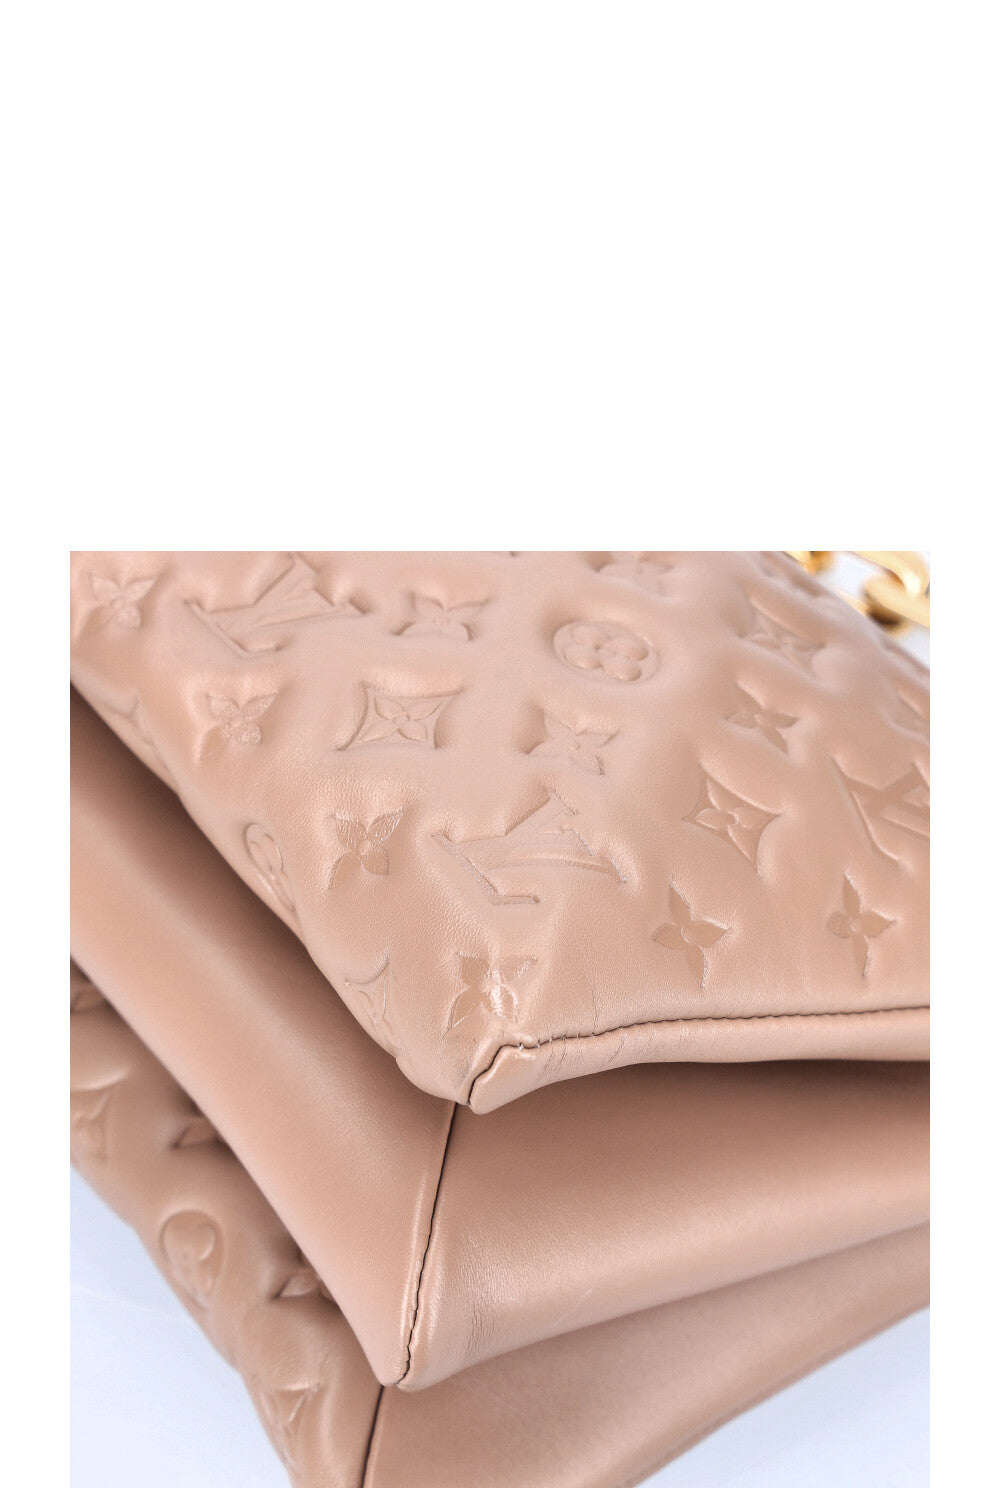 LOUIS VUITTON Coussin MM Taupe